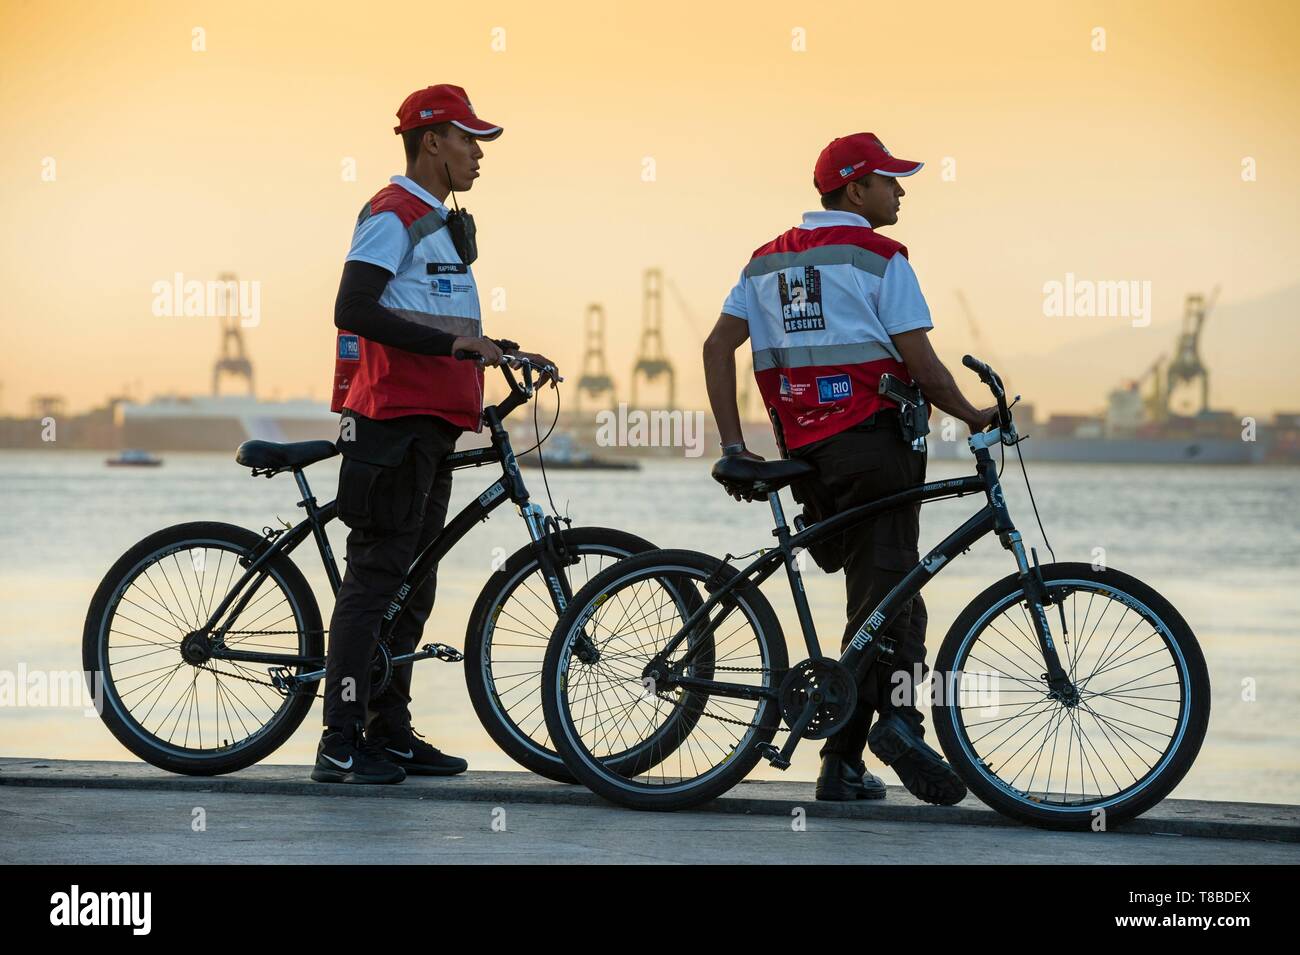 Brazil, Southeast region, Rio de Janeiro, city classified World Heritage of UNESCO, city center (Centro), view of the Atlantic ocean from Maua square, in front of the Museum of Tomorrow (Museo do Amanha) designed by architect Santiago Calatrava, two policemen on bicycle Stock Photo